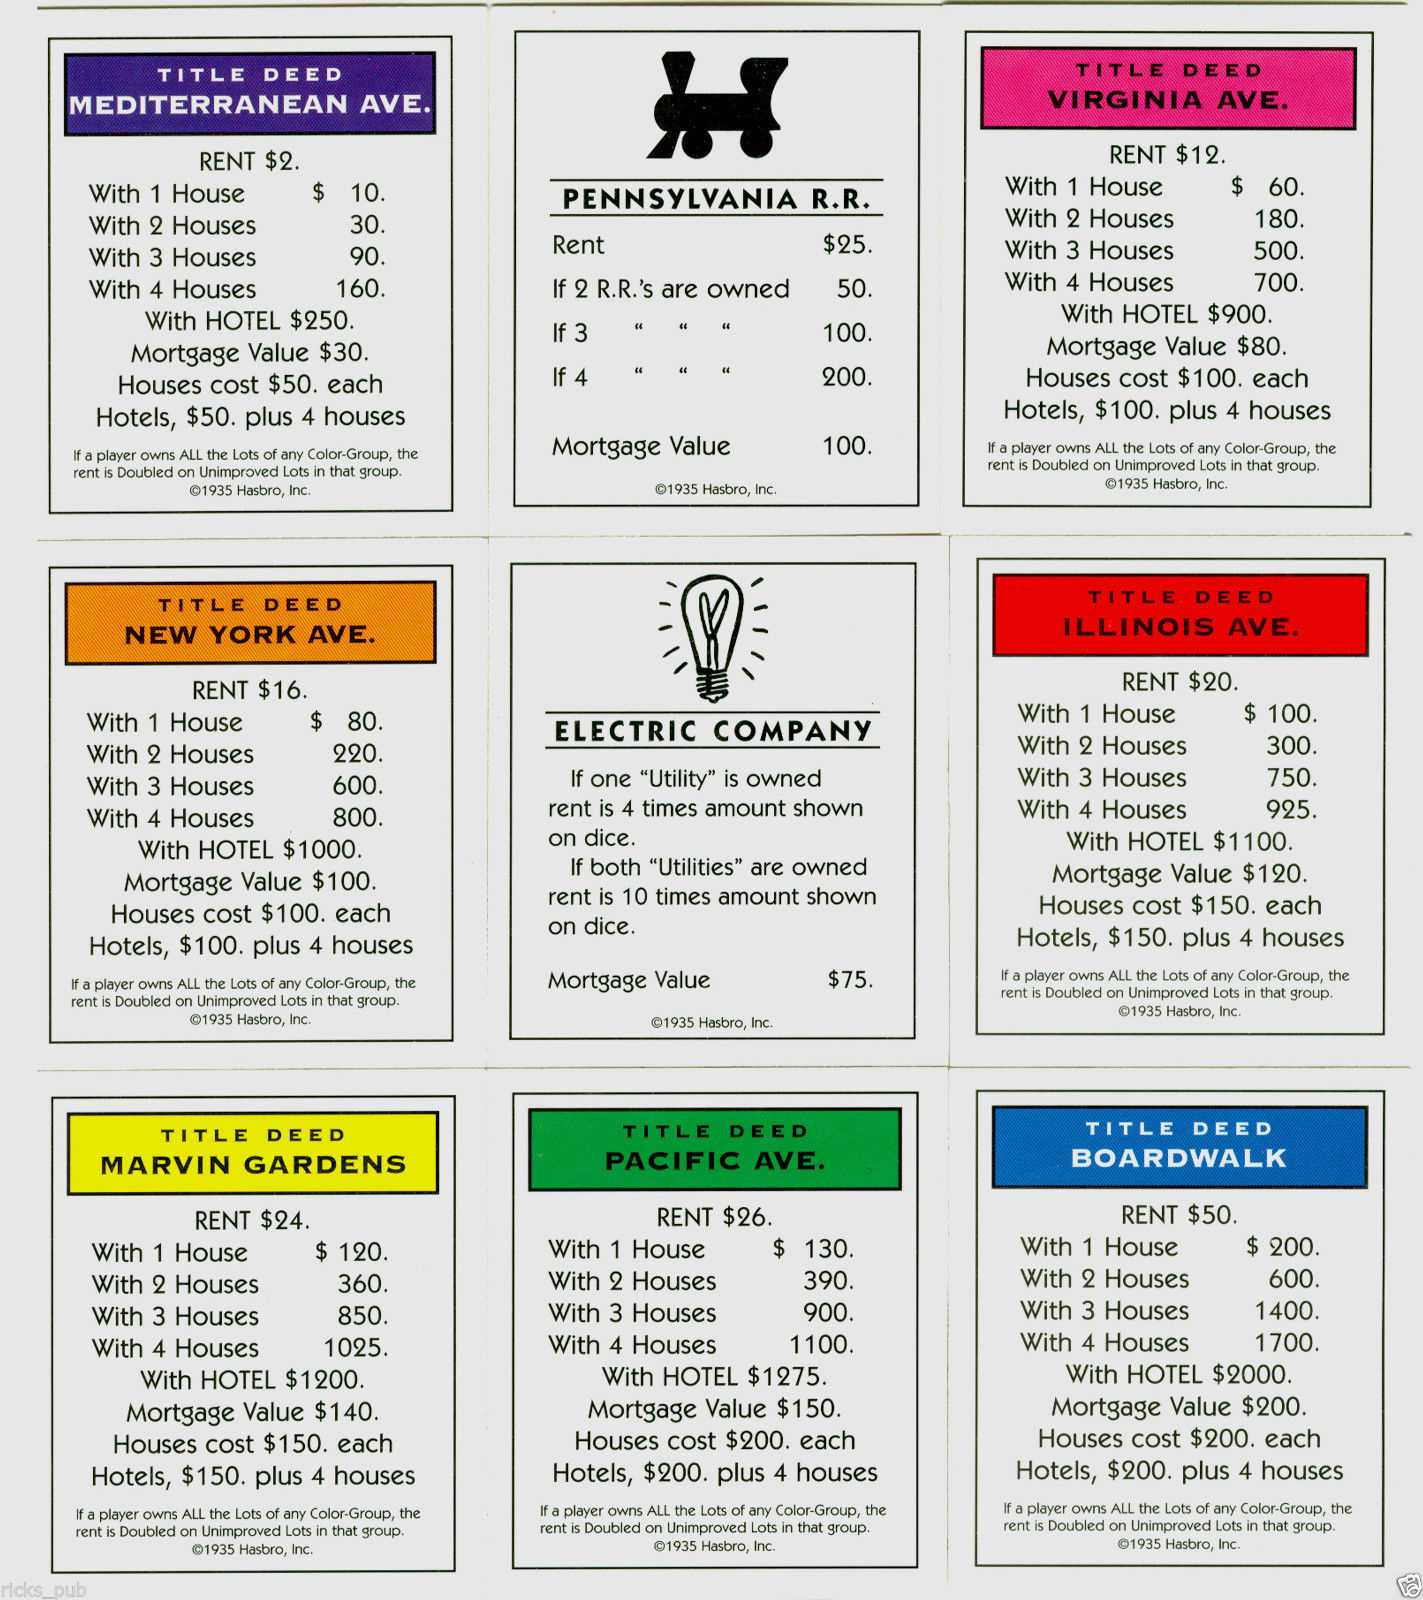 1C1 Monopoly Chance Card Template | Wiring Library Regarding Monopoly Property Card Template